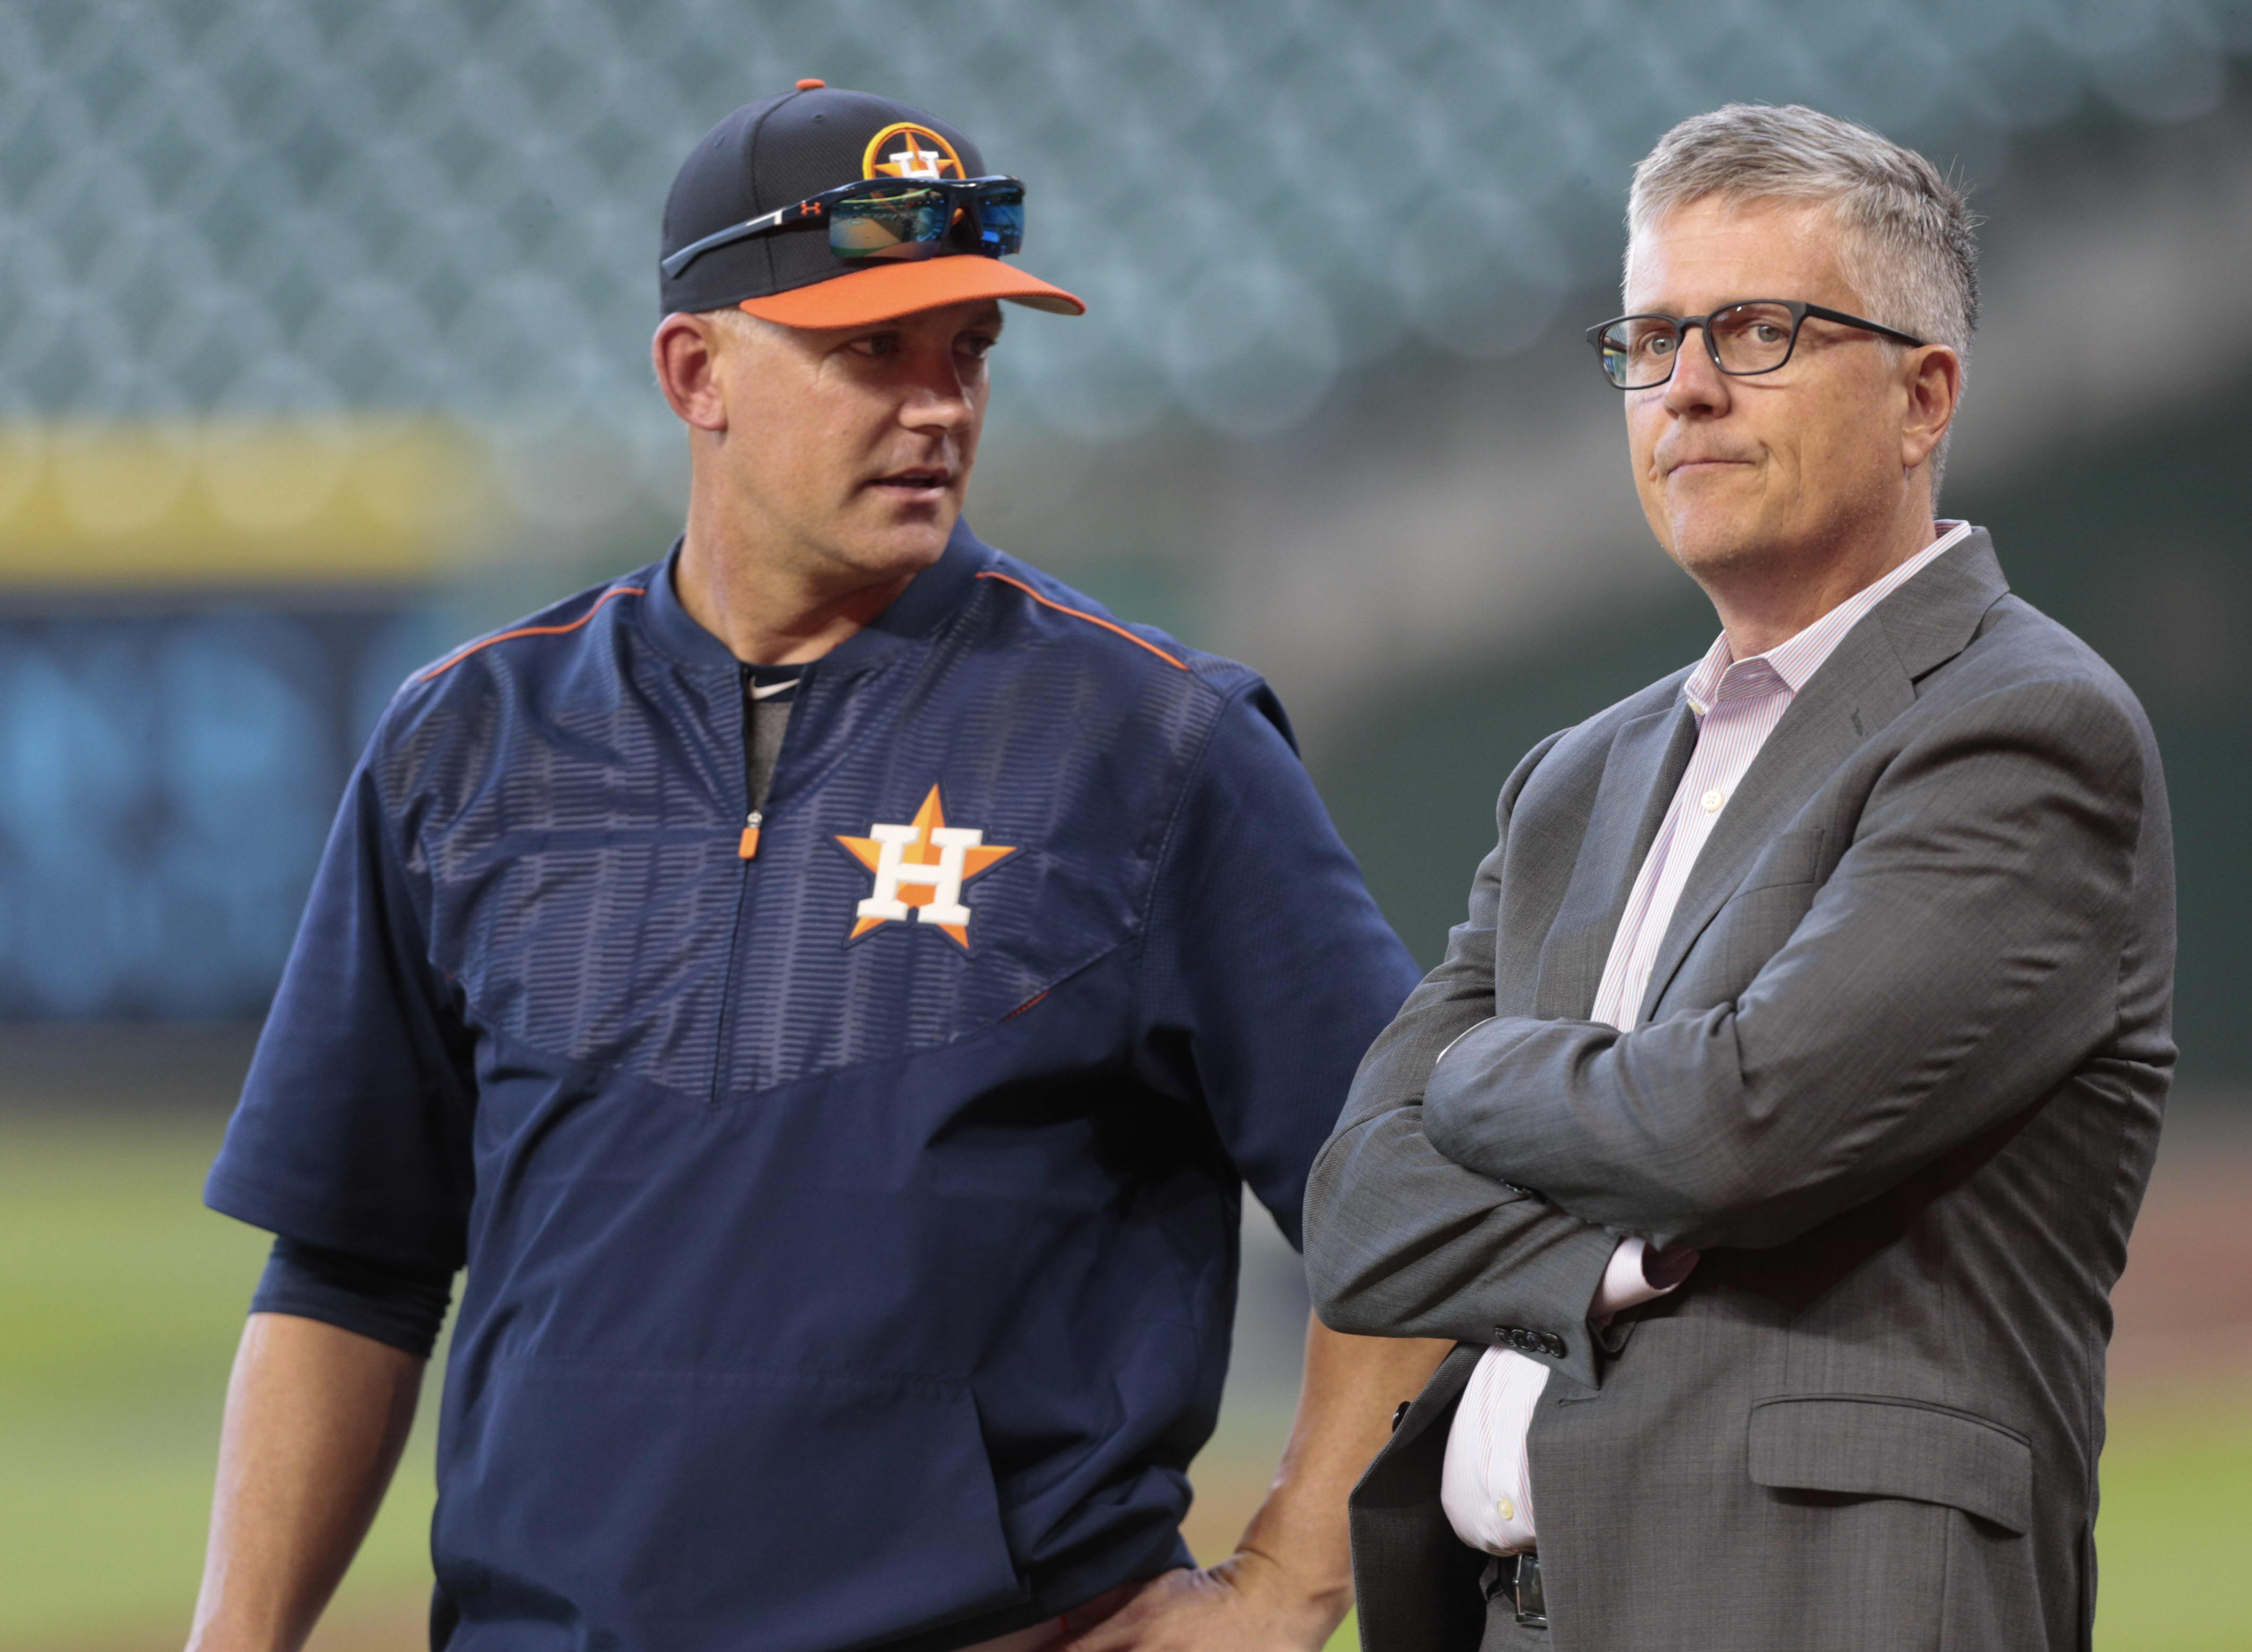 New Book Shows Astros Kept Cheating After 2018